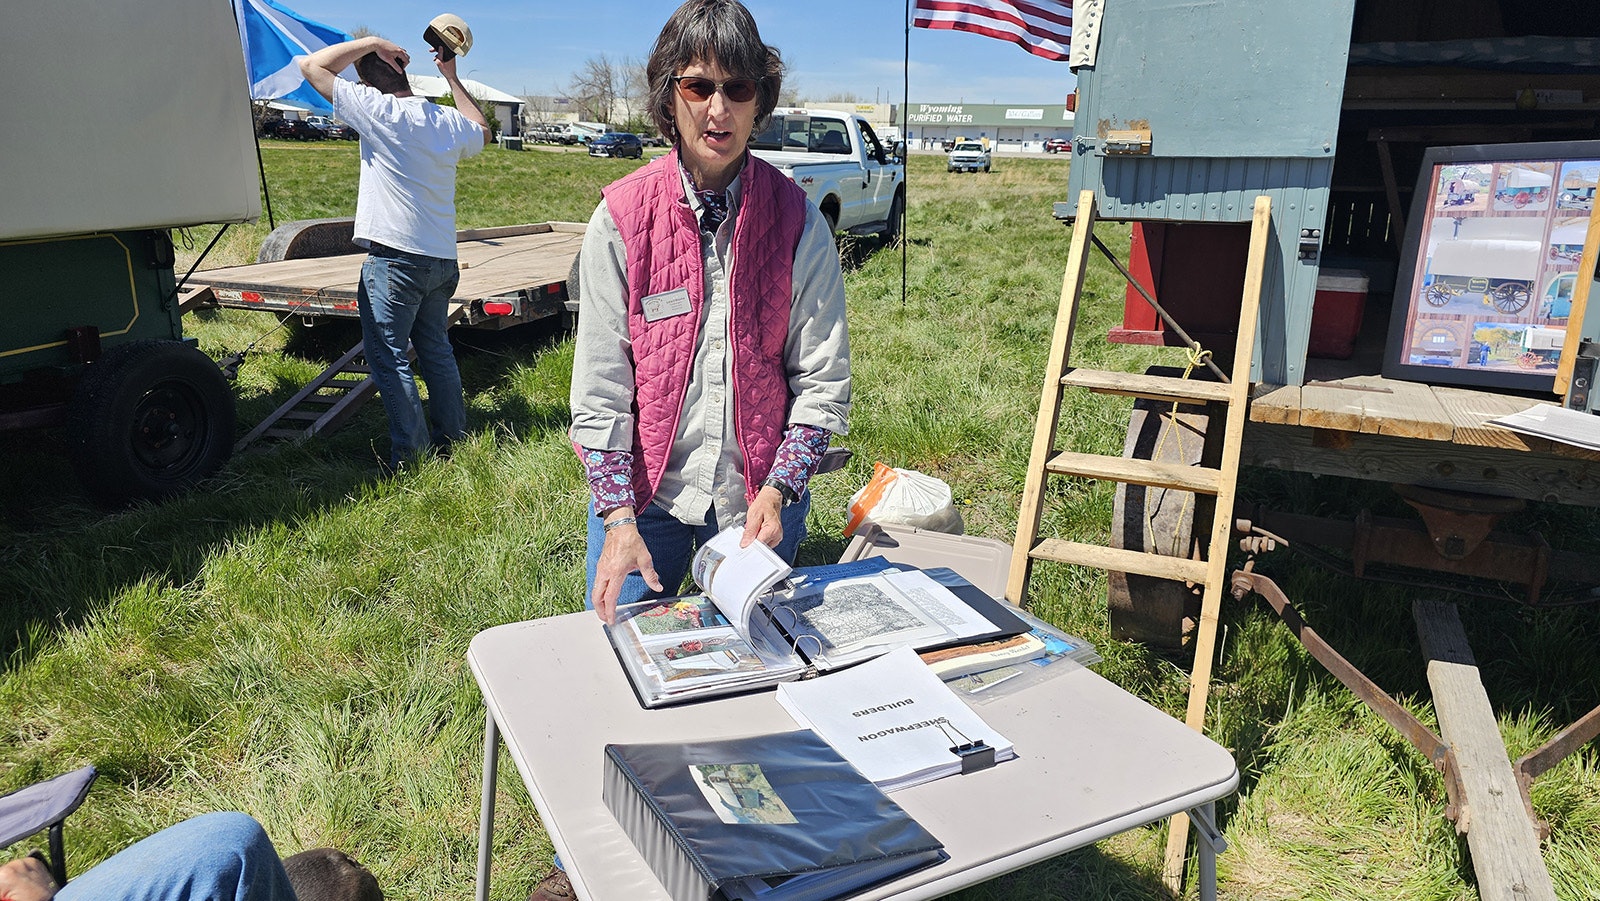 Lora O'Rourke and her husband, the late Jim O'Rourke, spent a lifetime restoring sheep wagons, many of them from Wyoming. She was among those at Gillette's third annual Sheepherder's Festival, to help celebrate sheep wagons and sheepherding history.